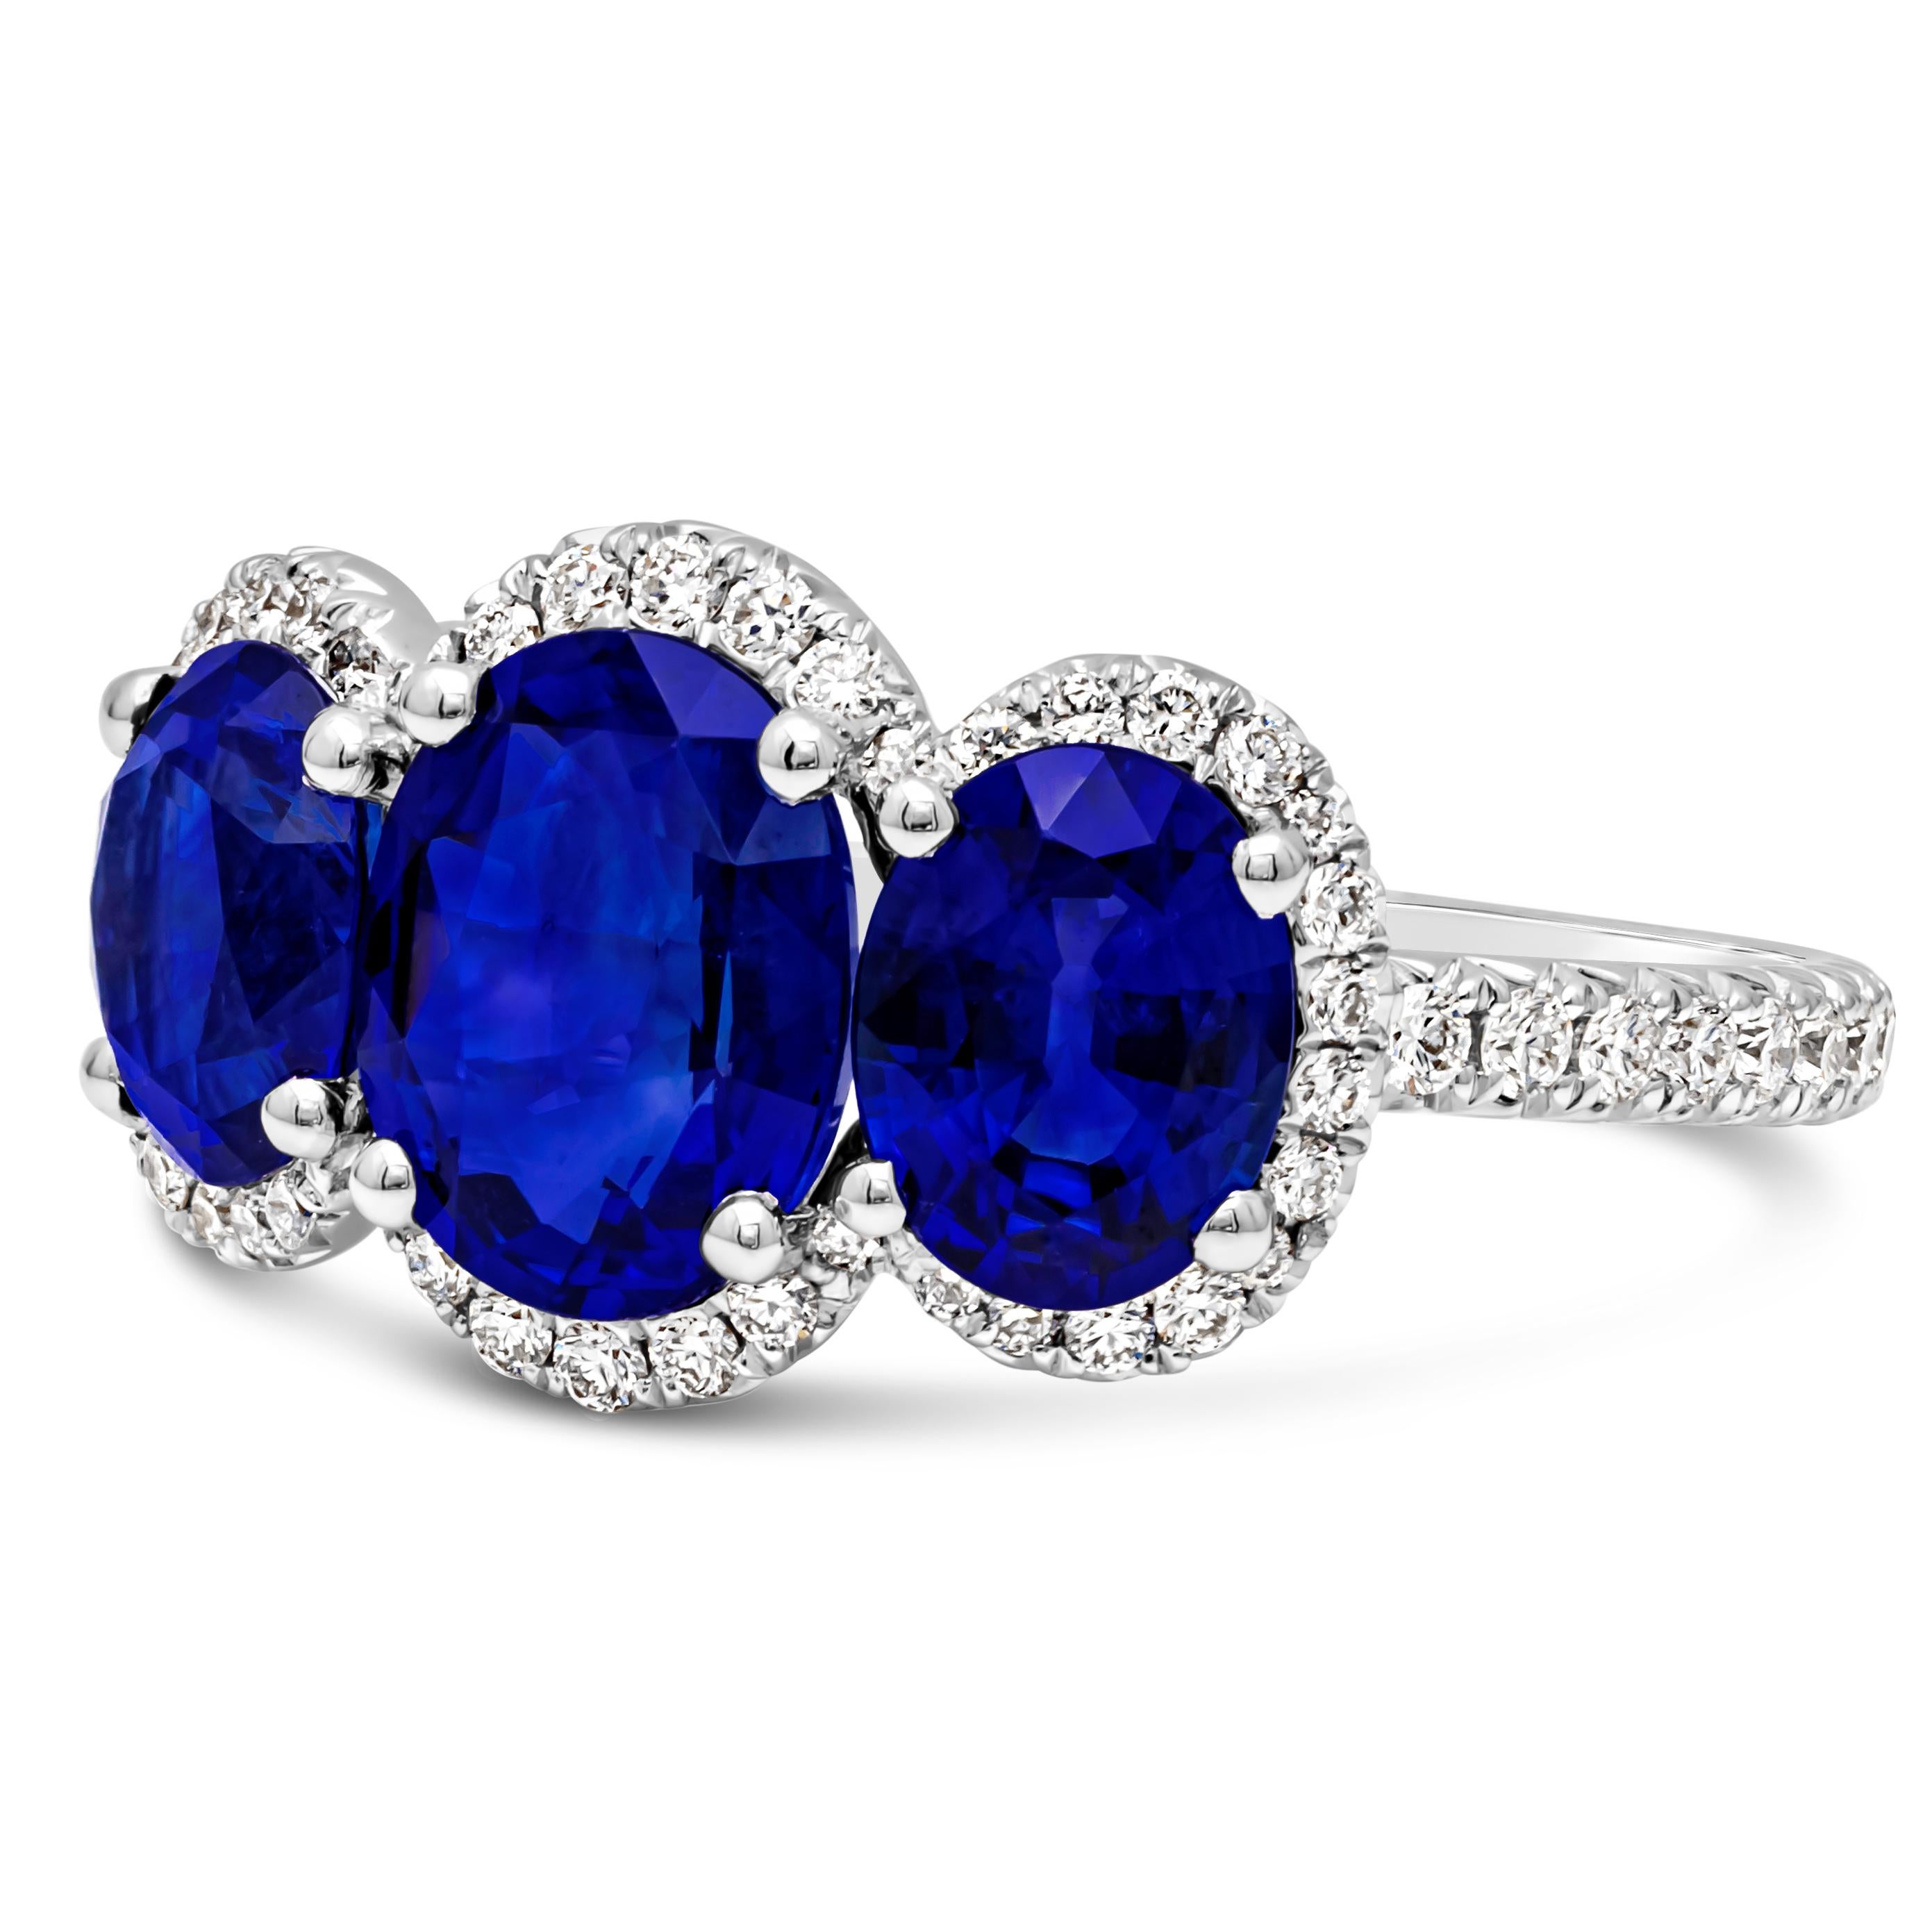 This classy and elegant three-stone halo engagement ring showcasing three oval cut natural blue sapphire weighing 3.40 carats total, surrounded by a row of round brilliant diamonds in a halo design weighing 0.4 carats total. Accented with brilliant